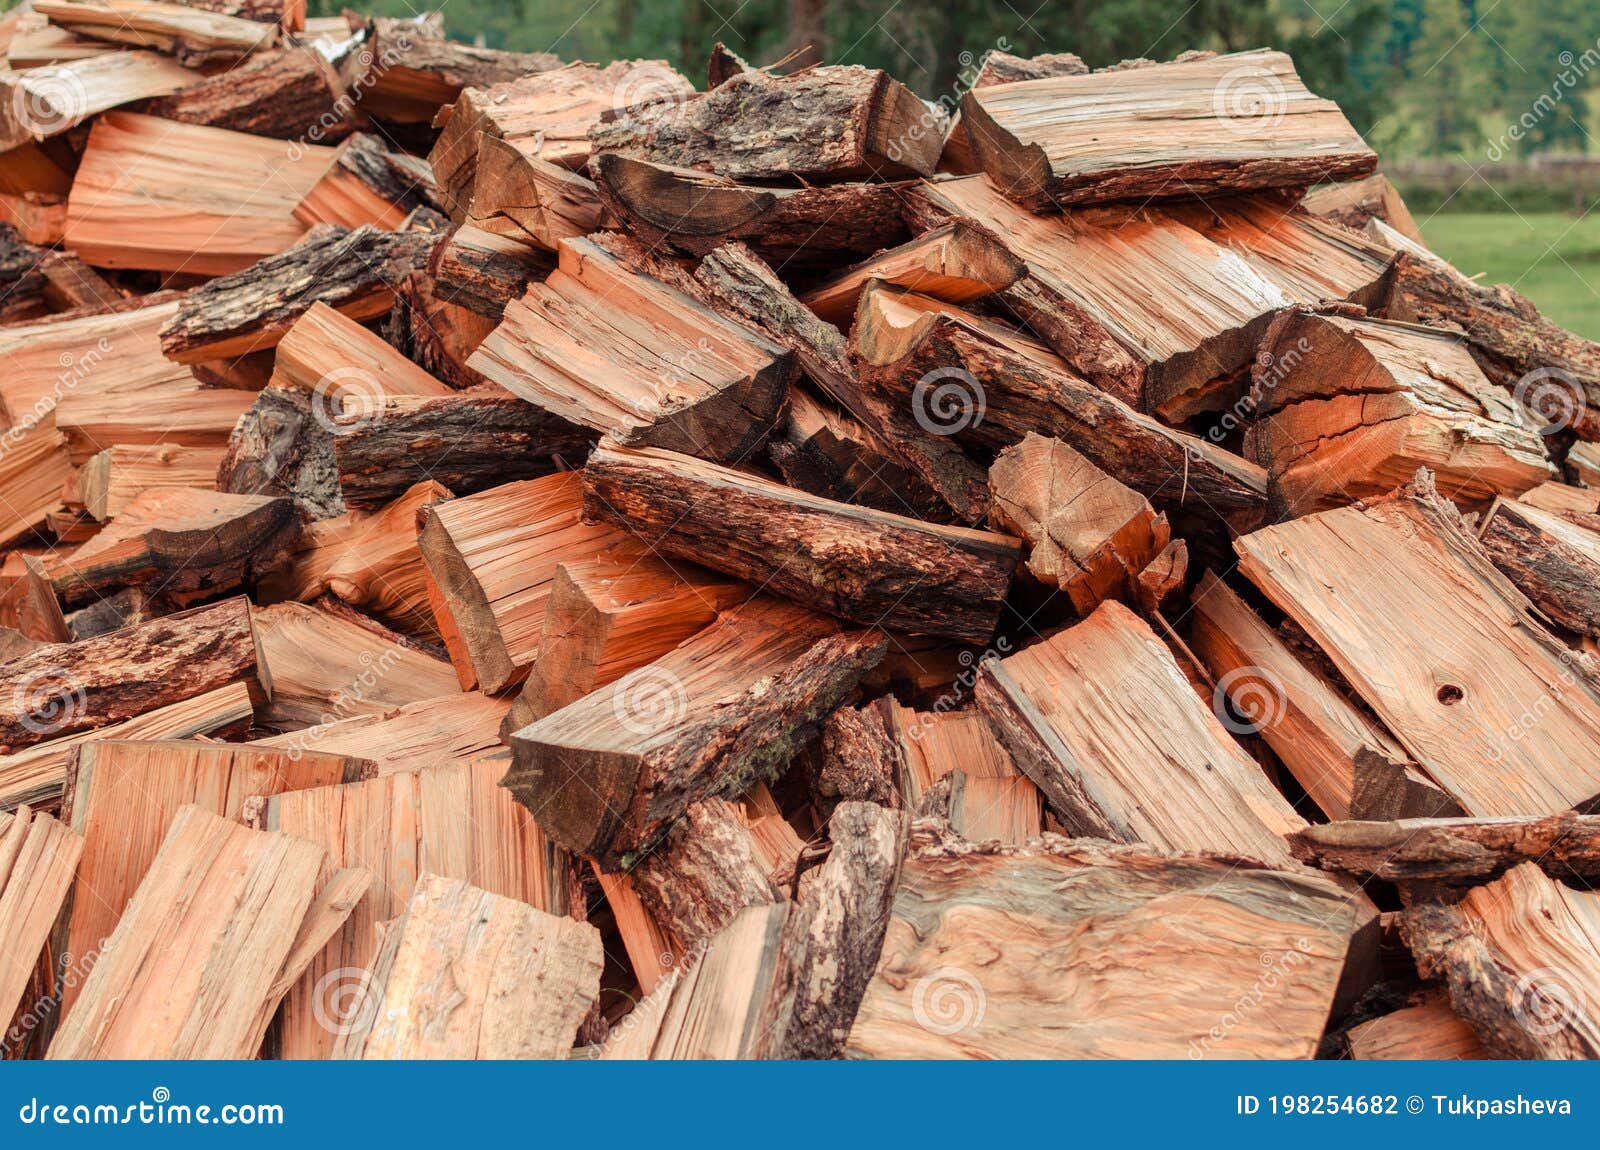 552 Lots Logs Photos Free Royalty Free Stock Photos From Dreamstime